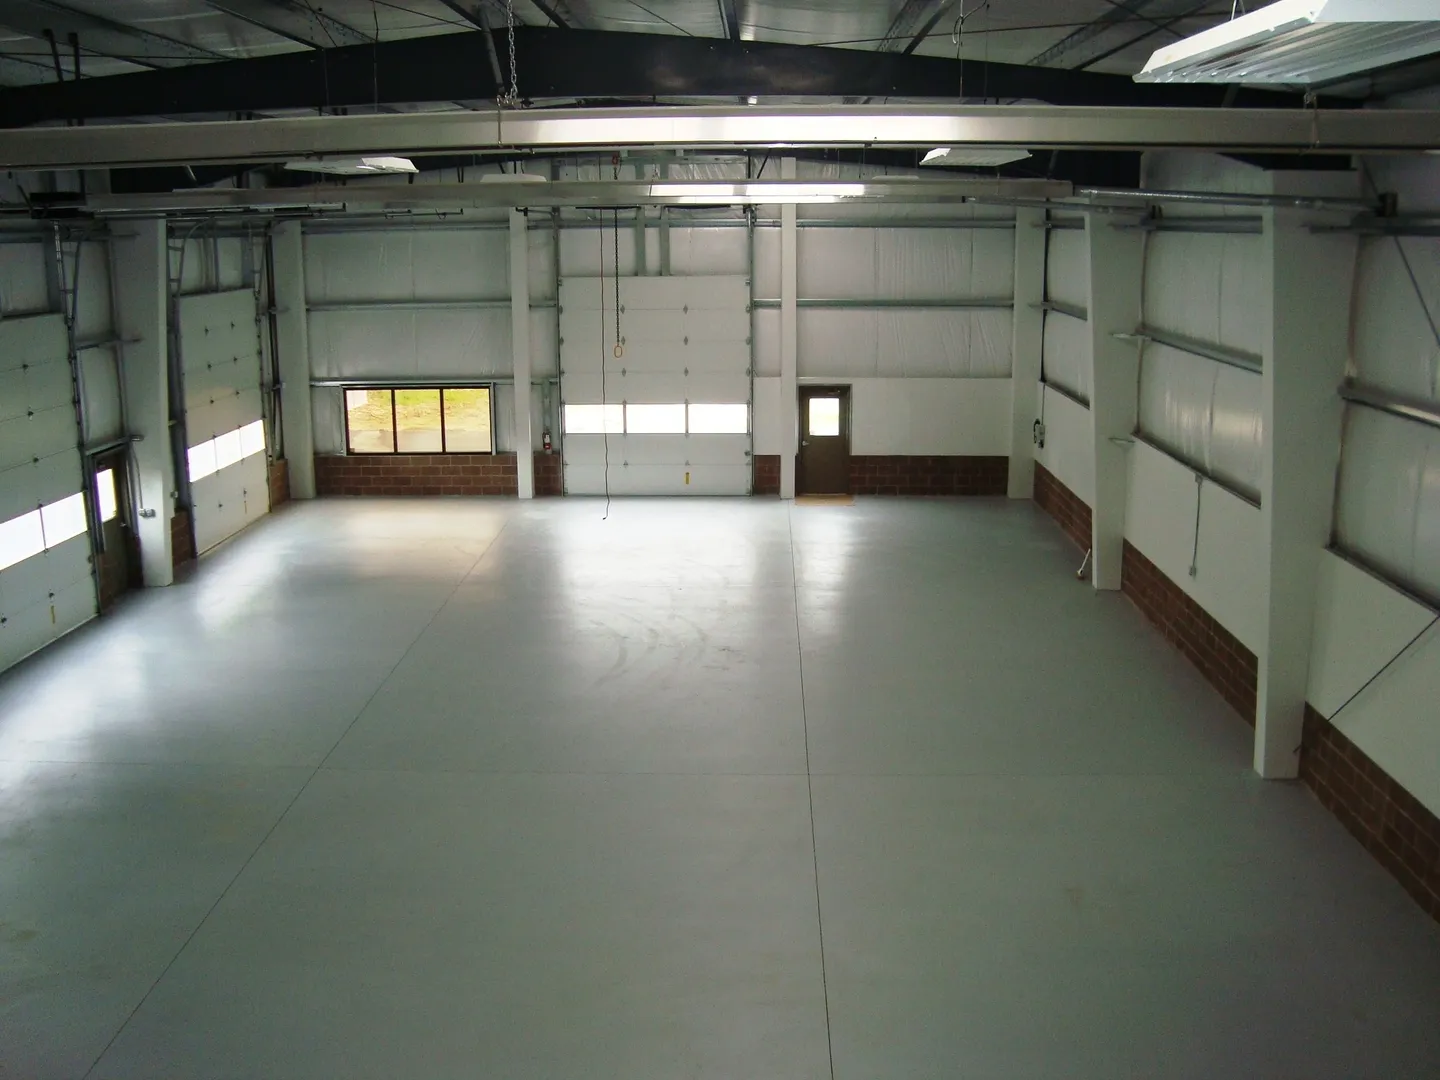 A large empty warehouse with lots of windows.